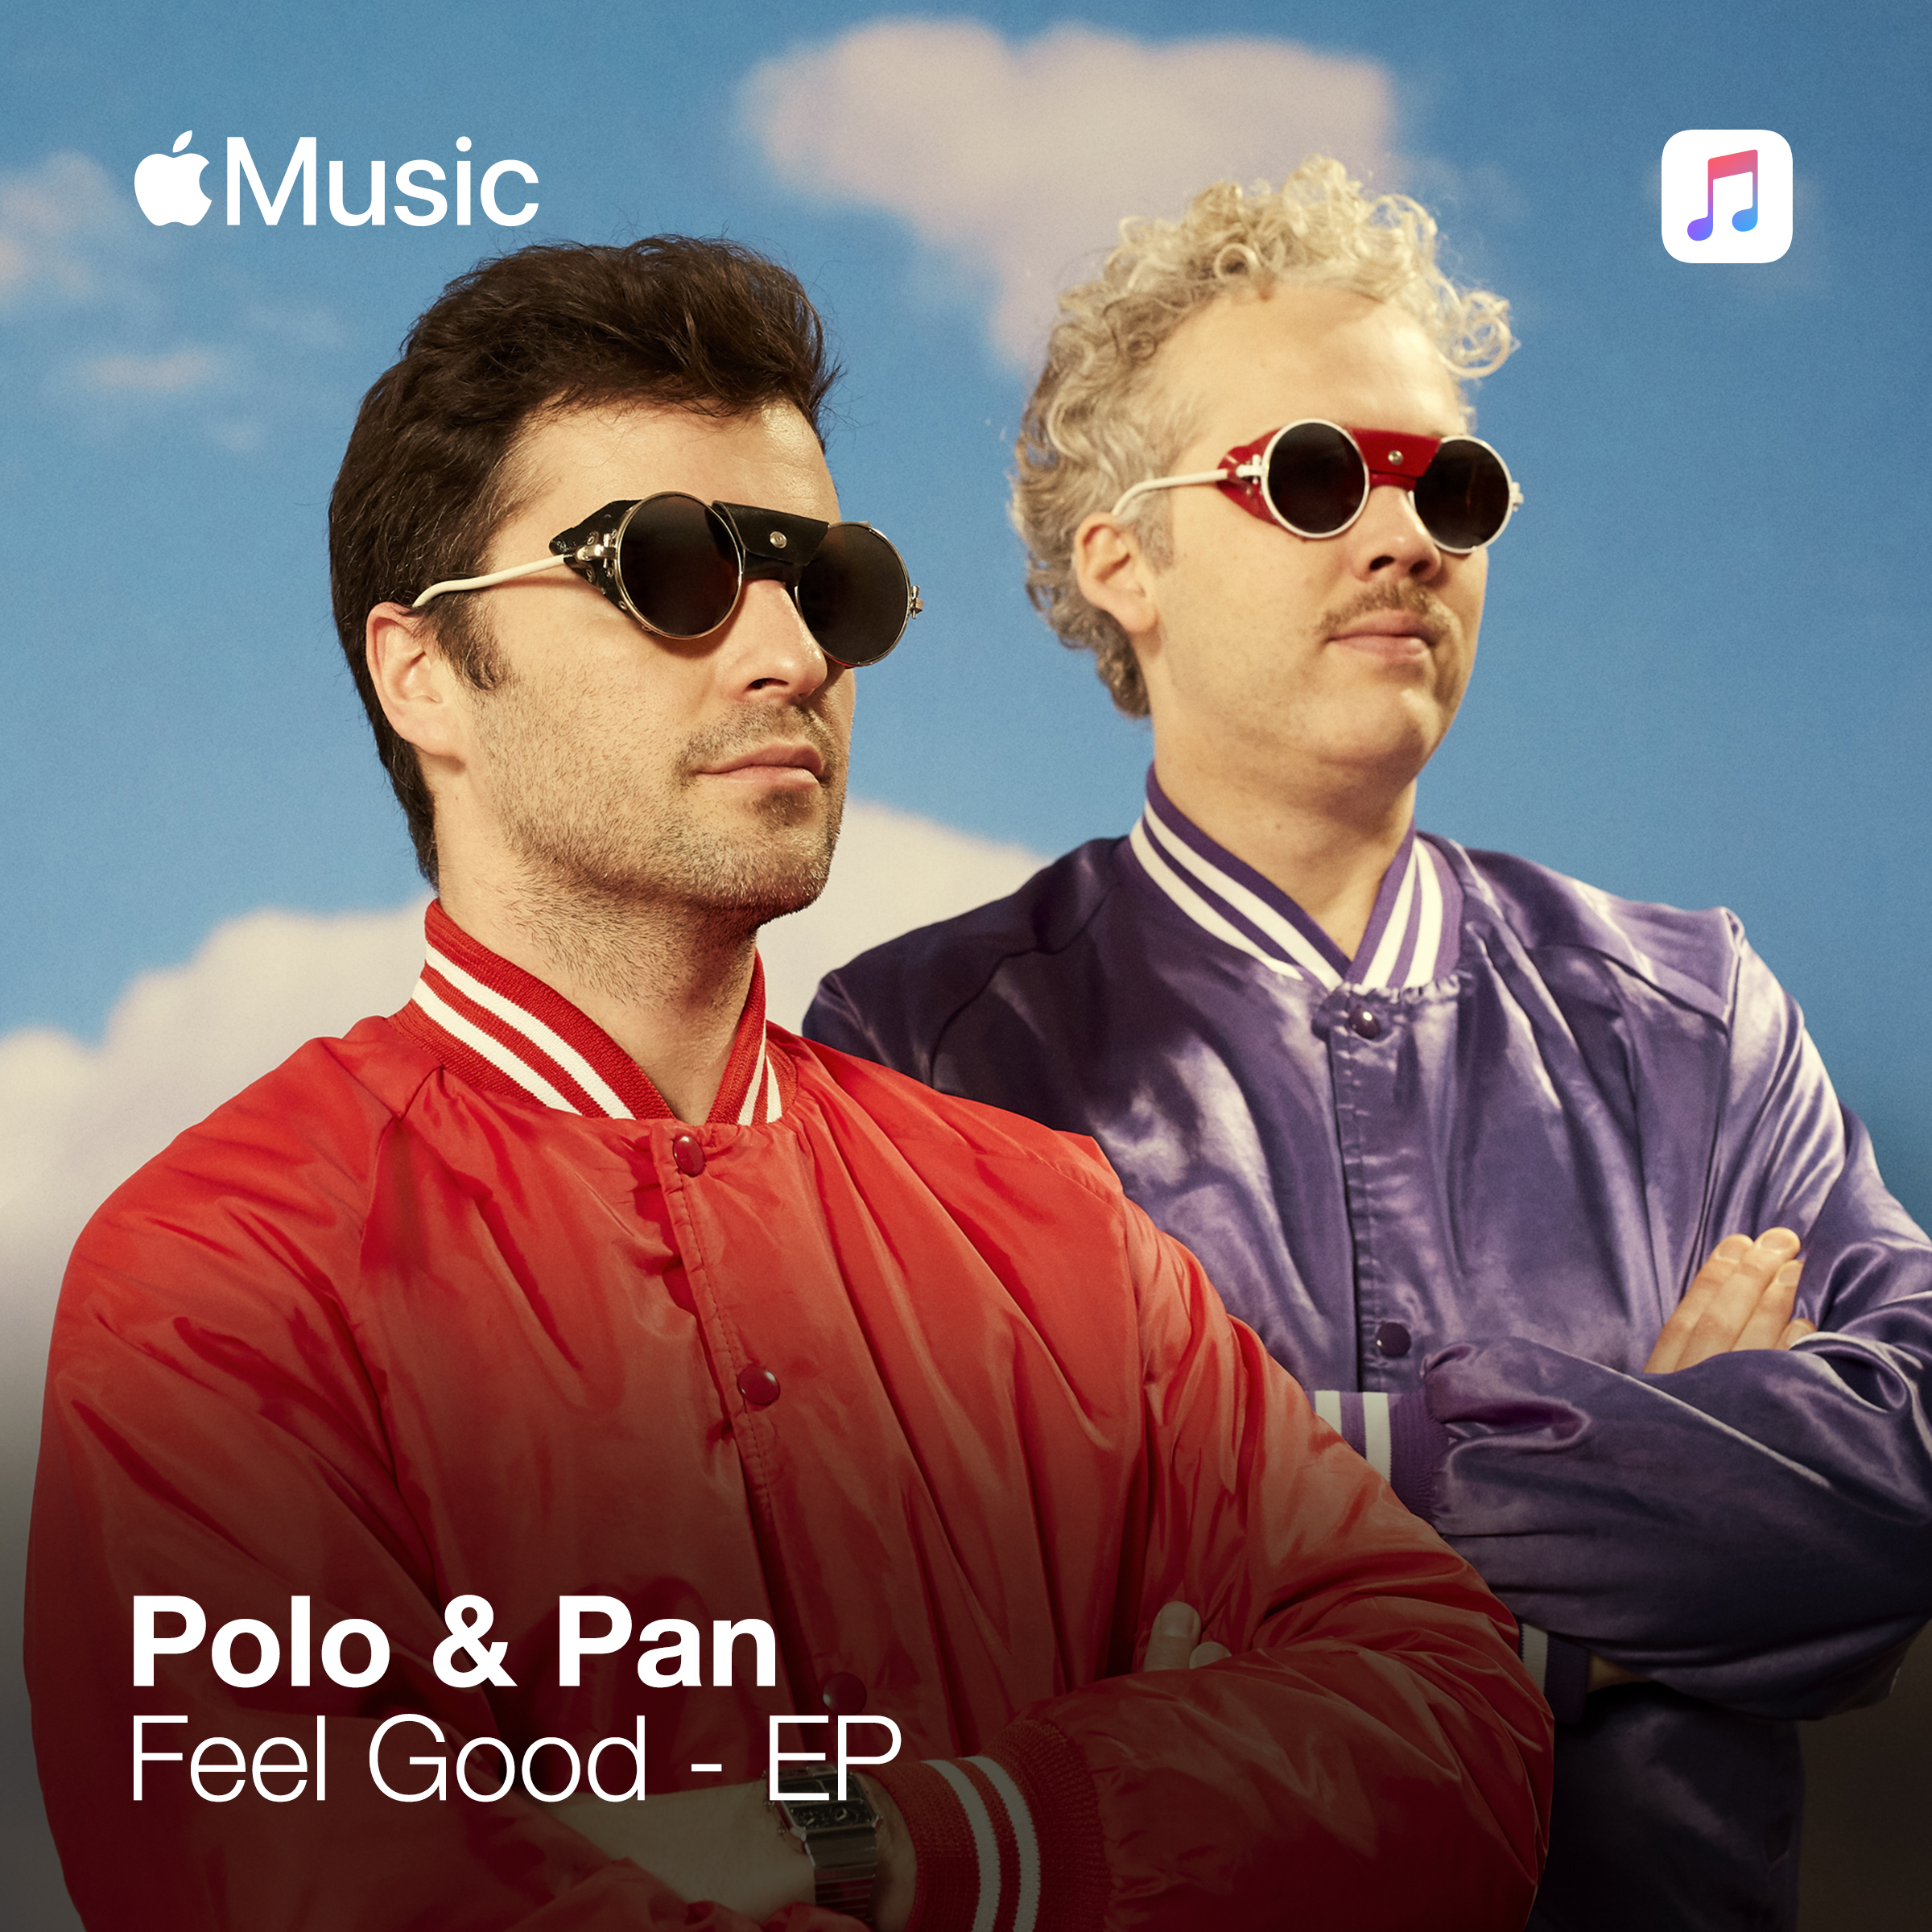 Polo & Pan on X: "Mexico querido! Enjoy our new EP Feel Good, out now!  Listen to it on @AppleMusicEs ! Los queremos ! P&P >>  https://t.co/APRIBOlyI4 https://t.co/jvNhMwLZQL" / X